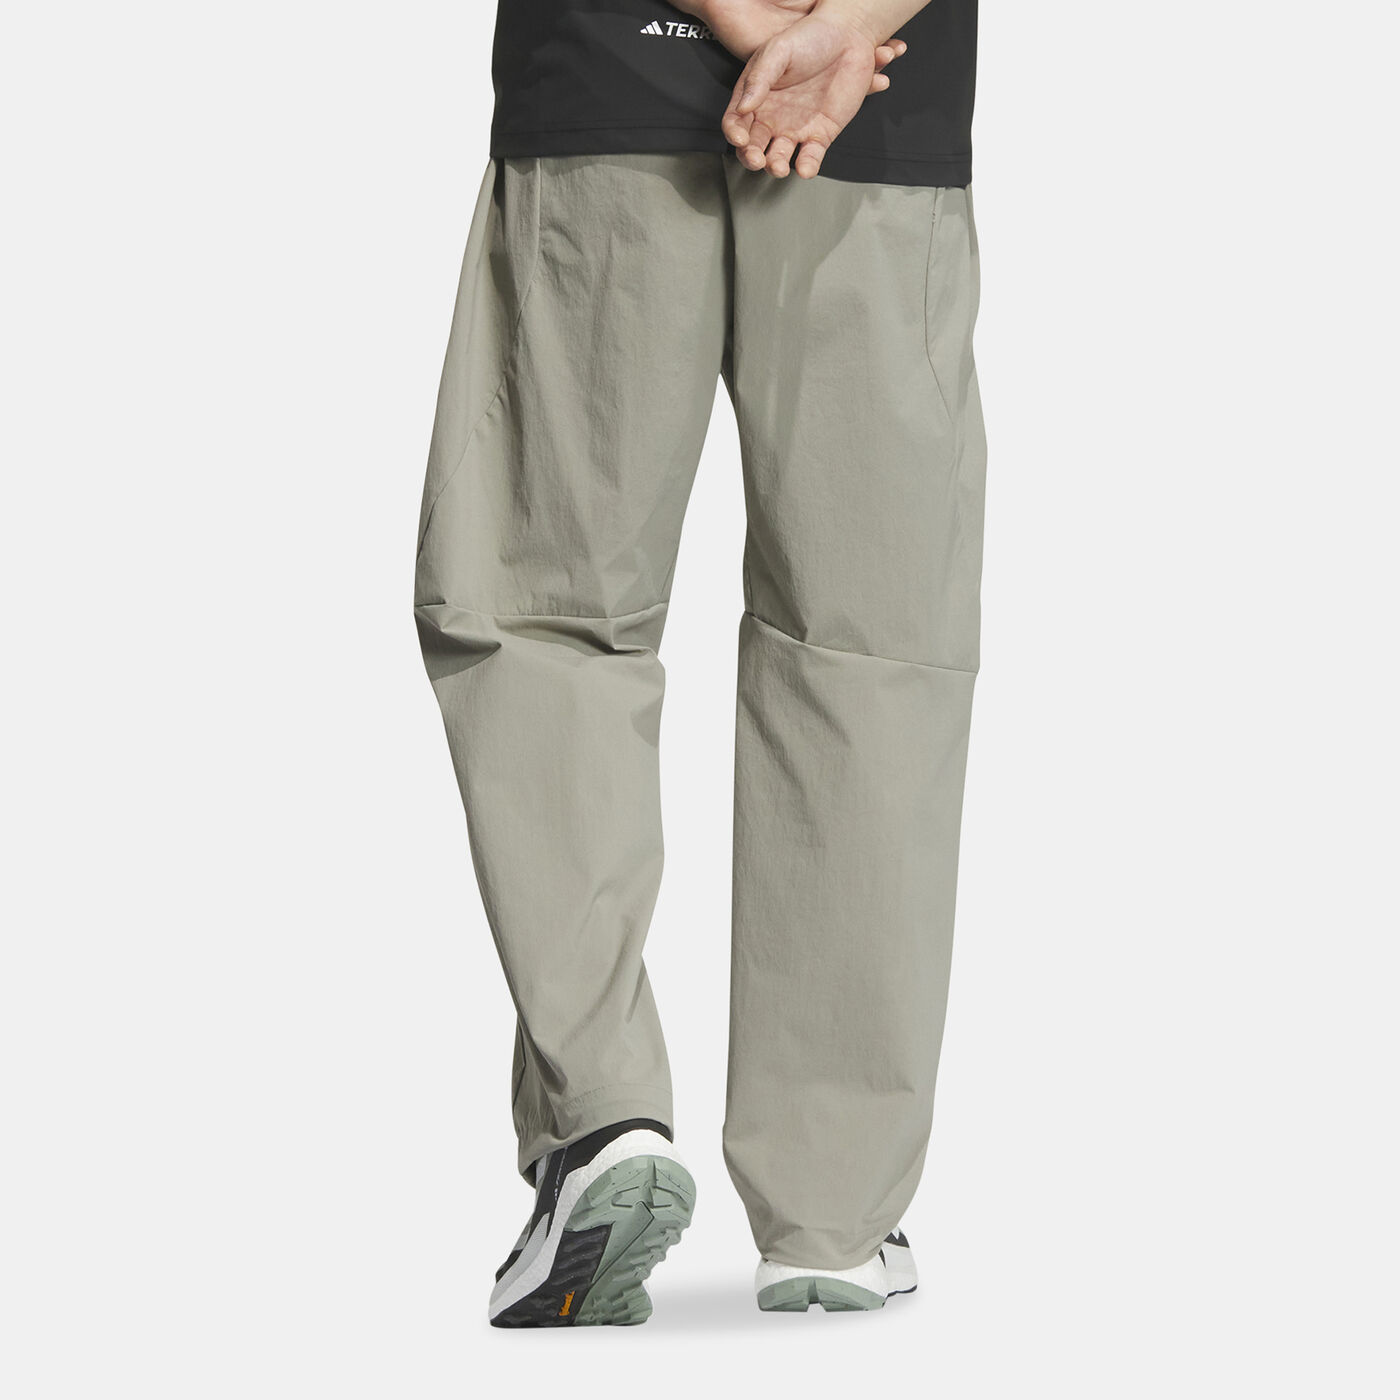 Men's National Geographic Pants